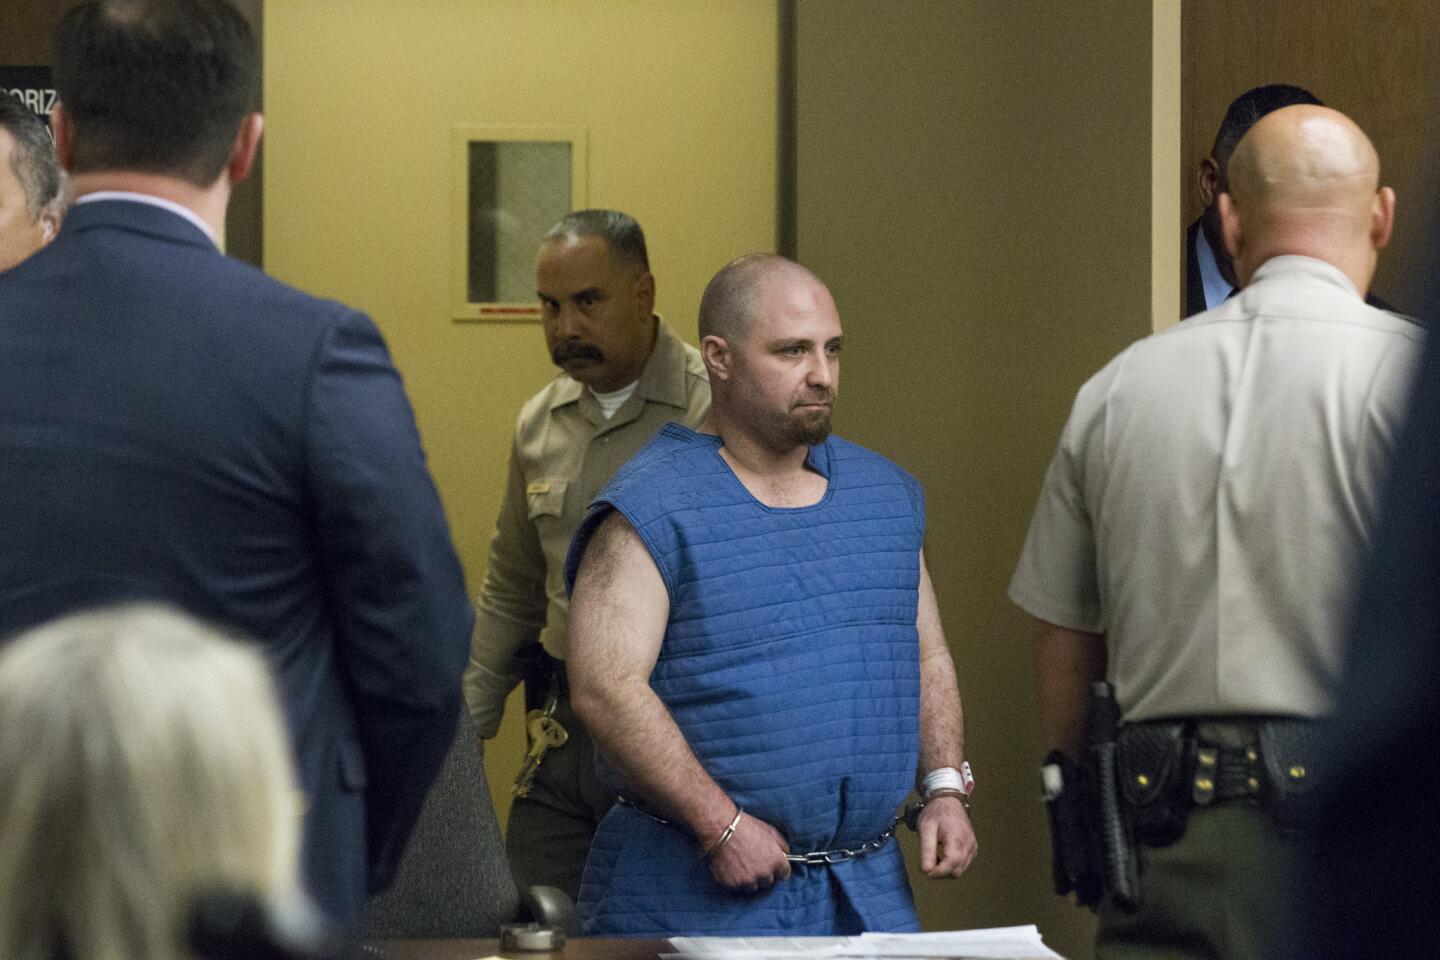 Aramazd Andressian Sr. walks into court on Wednesday, Aug. 23, where he was sentenced to 25 years to life in prison for murdering his 5-year-old son after a trip to Disneyland earlier this year.